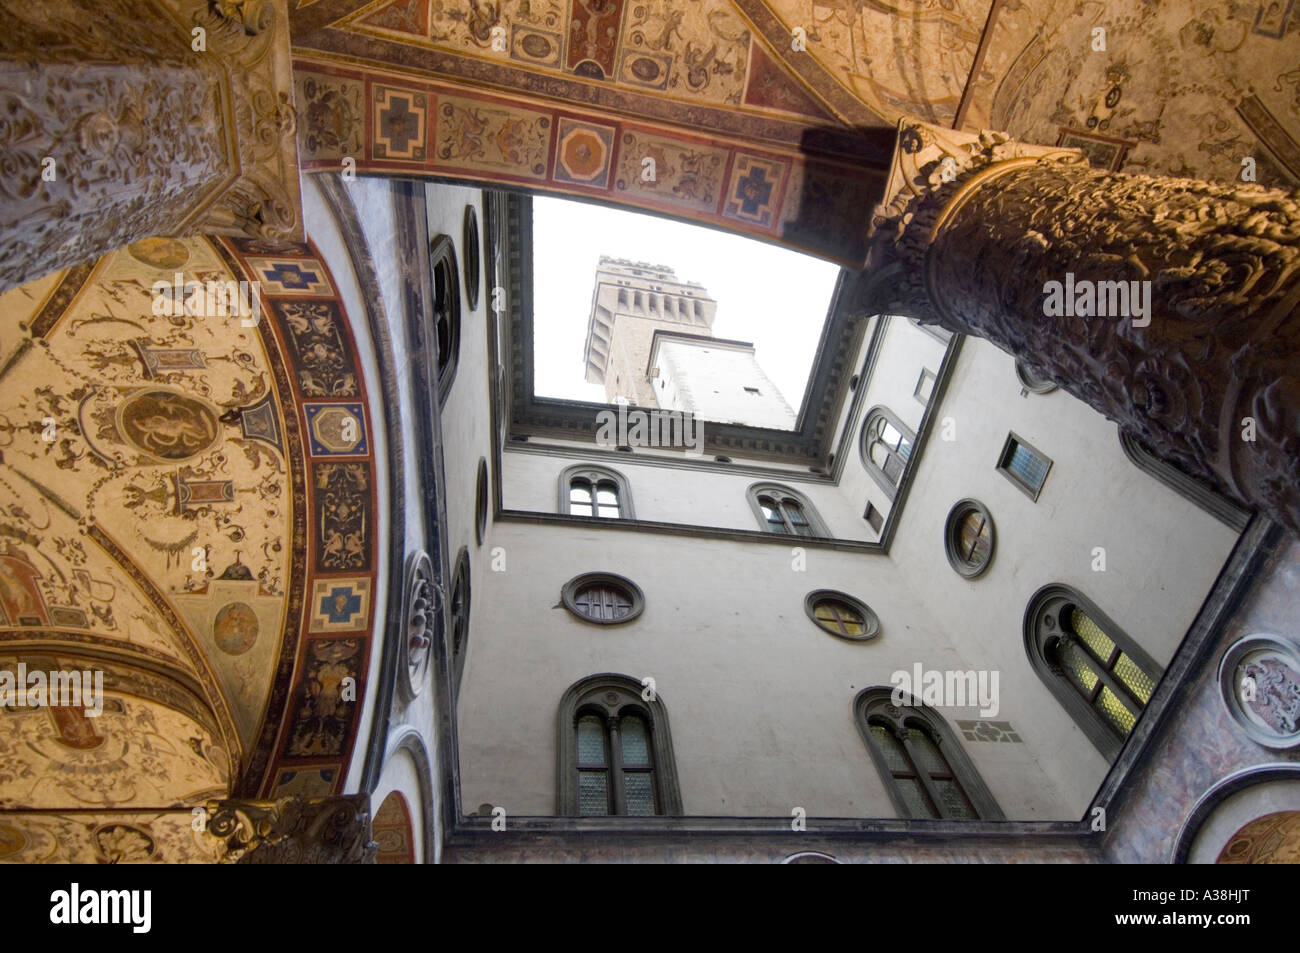 The ornate first courtyard at the entrance of the Palazzo Vecchio with its magnificent ceiling and the tower visible. Stock Photo